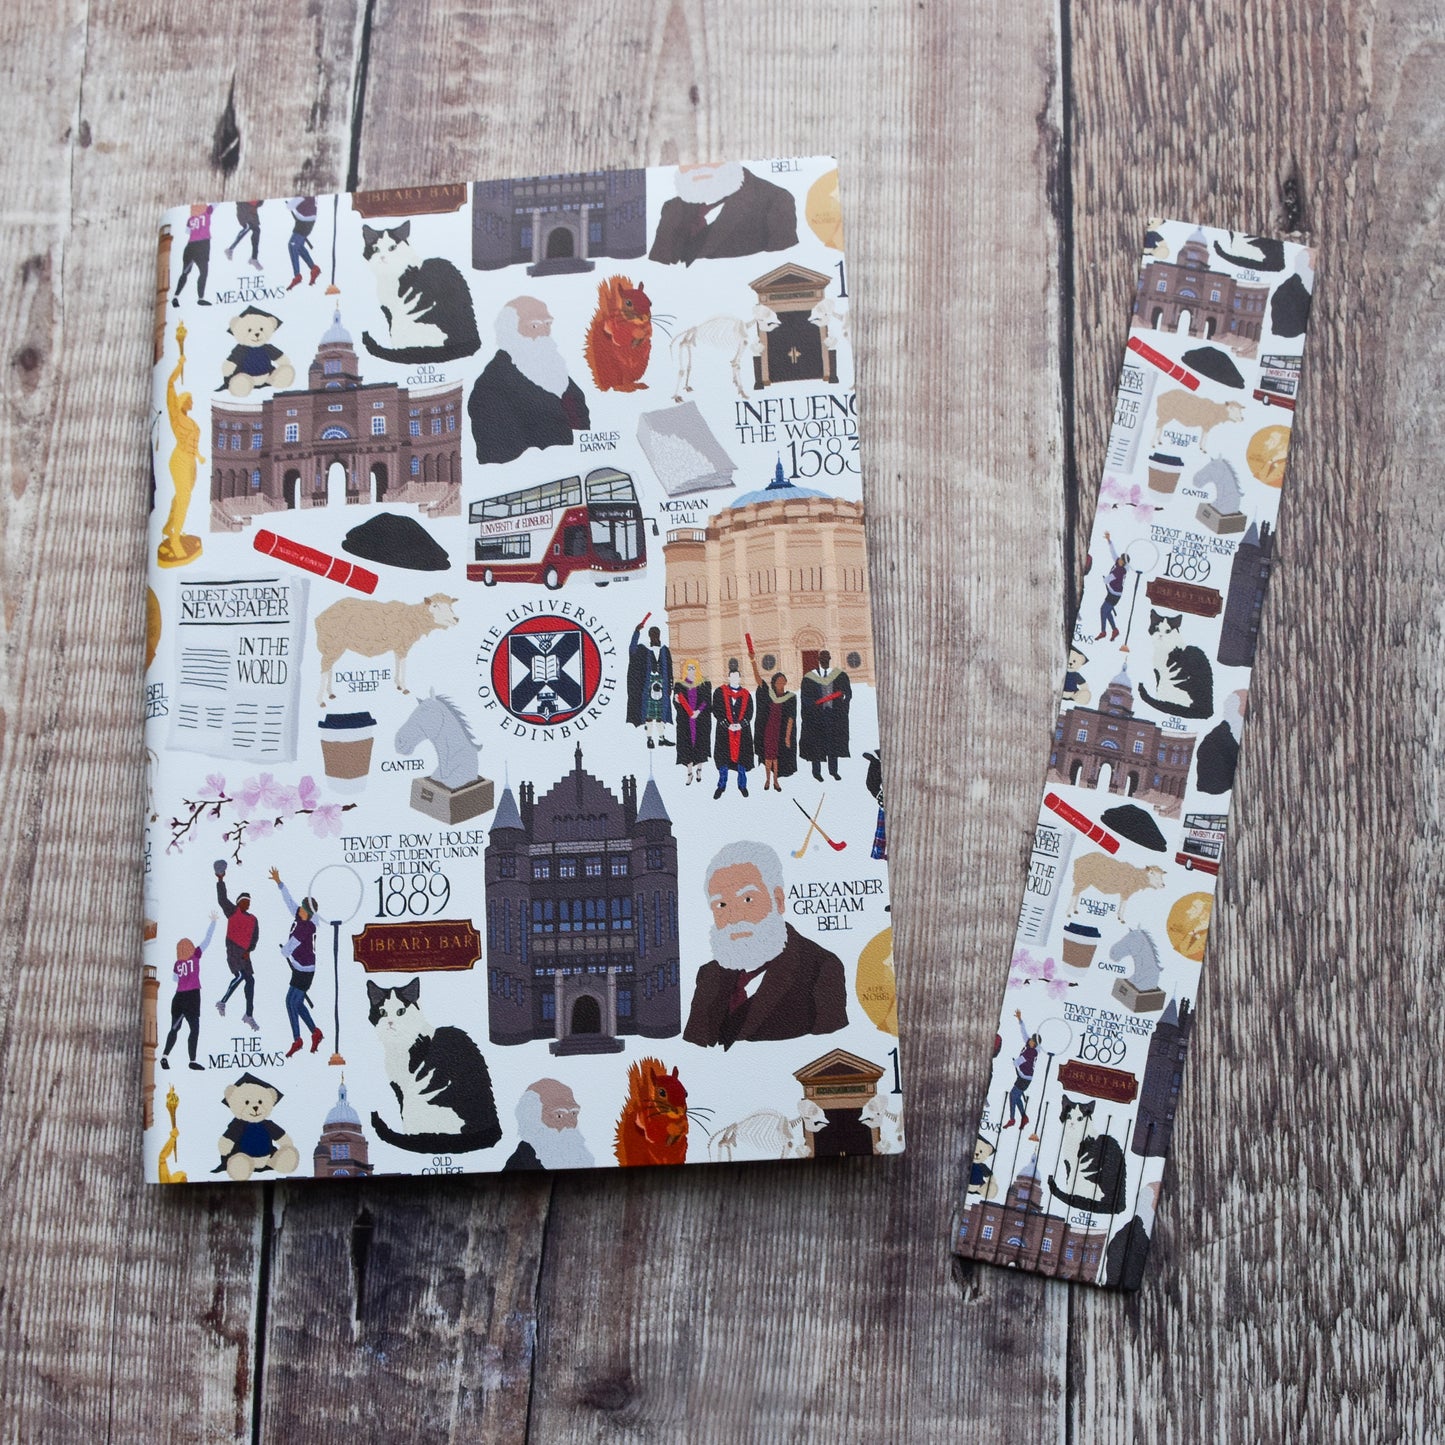 An A5 Heritage Collection Notebook and Heritage Collection bookmark placed side by side on a warm brown wooden background.